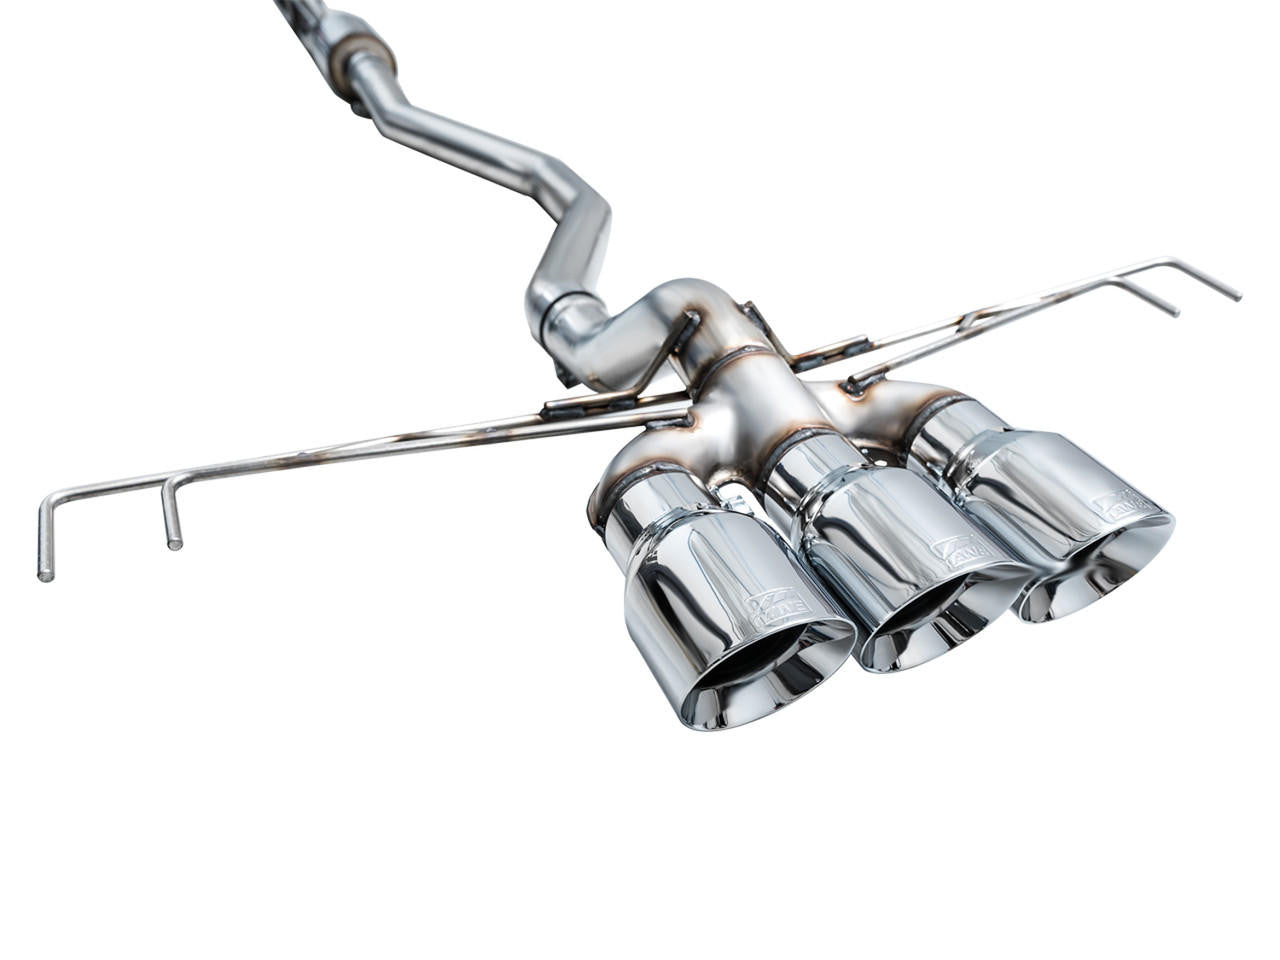 AWE Tuning AWE Track Edition Exhaust for FL5 Civic Type R - Triple Chrome Silver Tips 3020-52287 